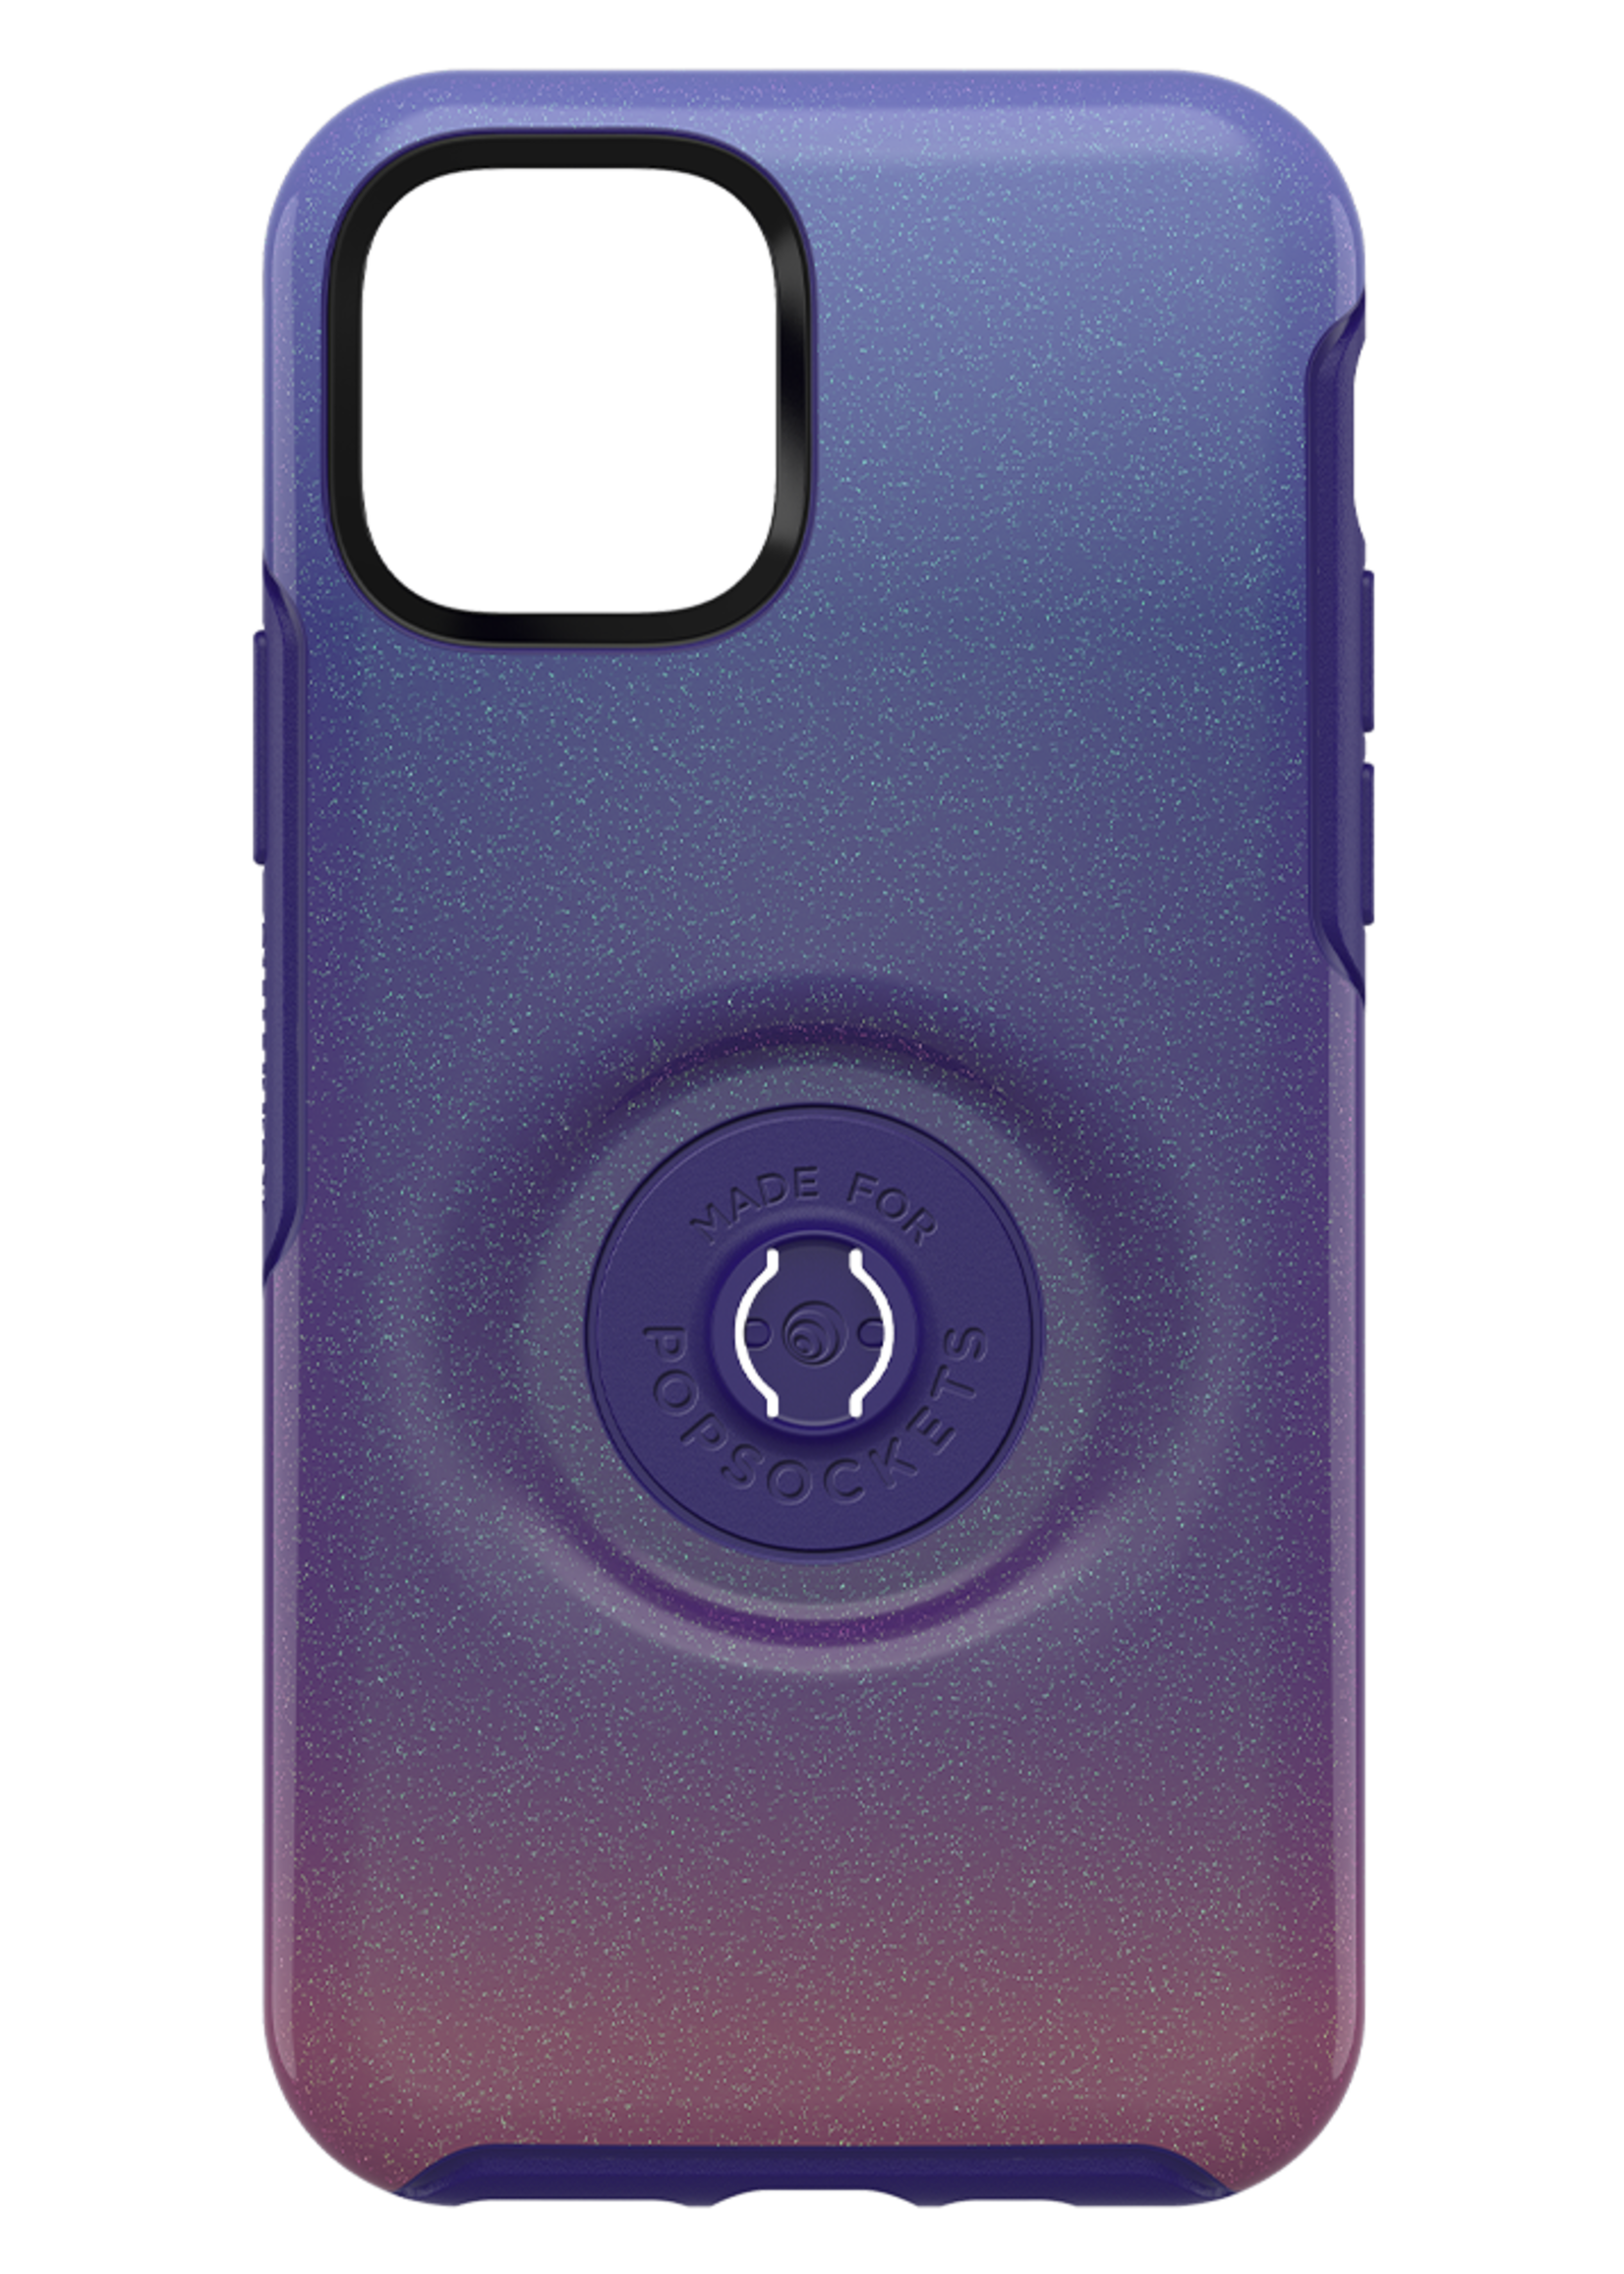 Otterbox OtterBox - Otter + Pop Symmetry Case with PopGrip for Apple iPhone 11 Pro - Violet Dusk